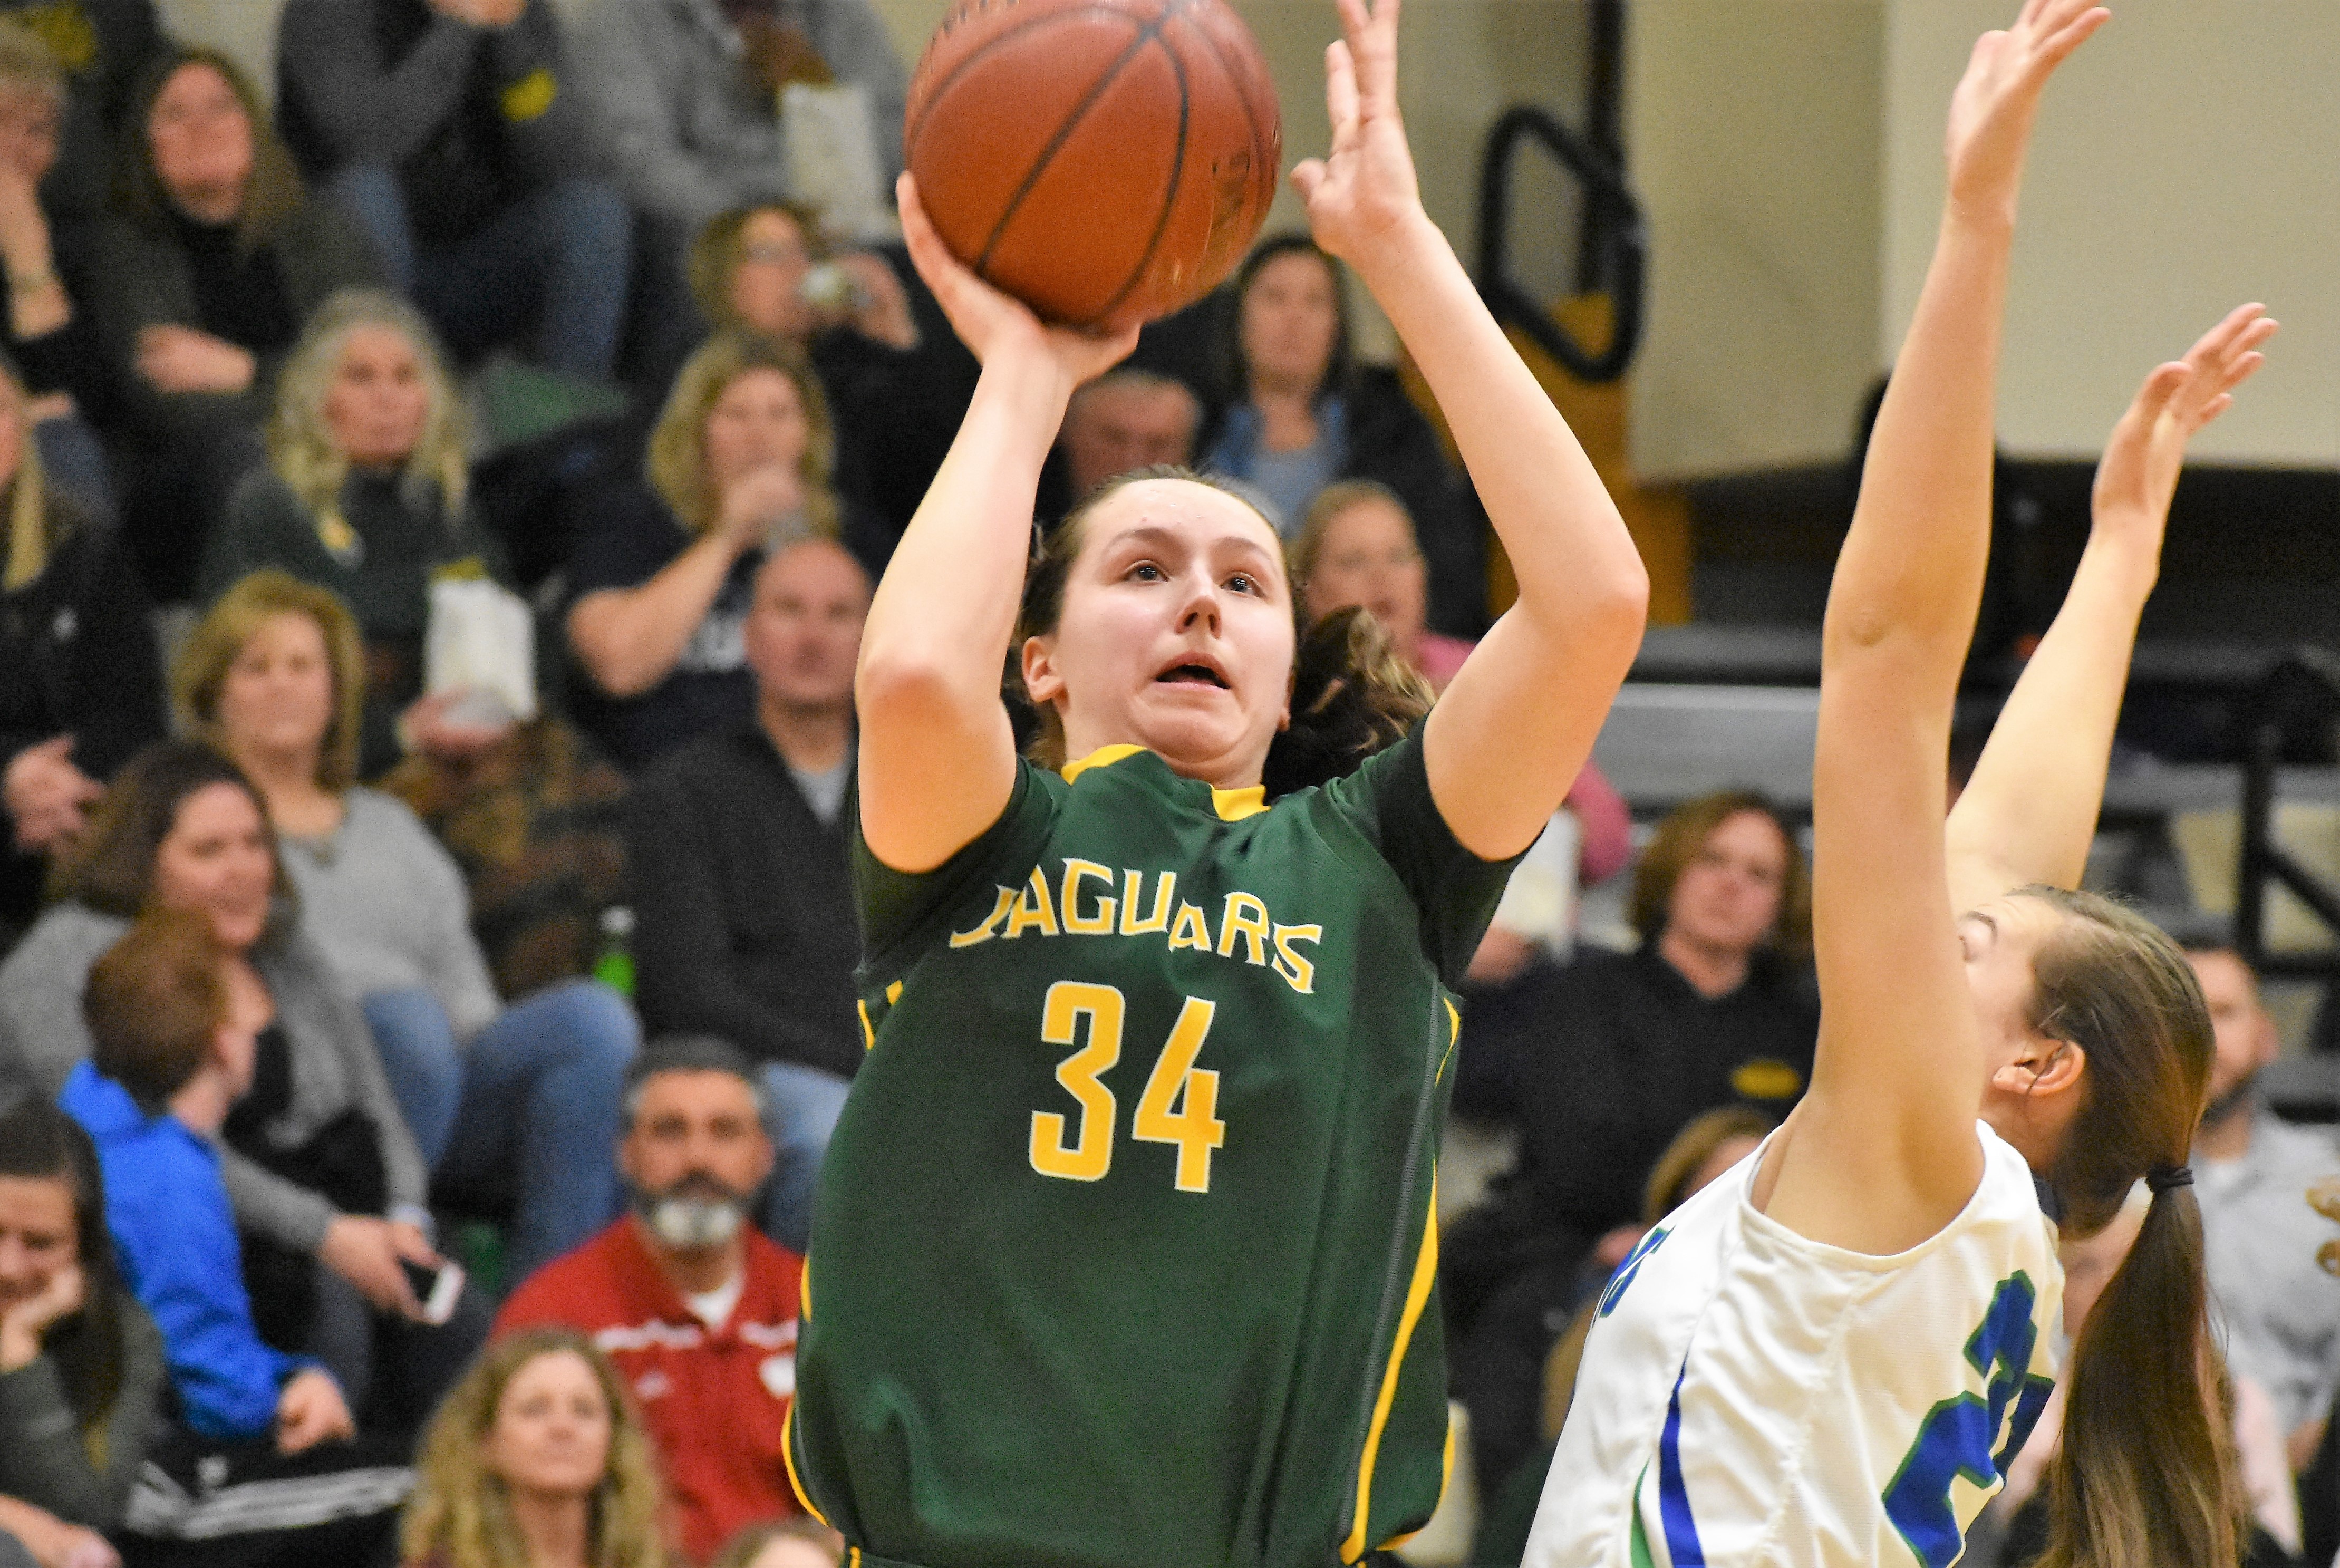 Schlader, Servais, Kupsh receive honors; Jaguars basketball recap and all-conference merits